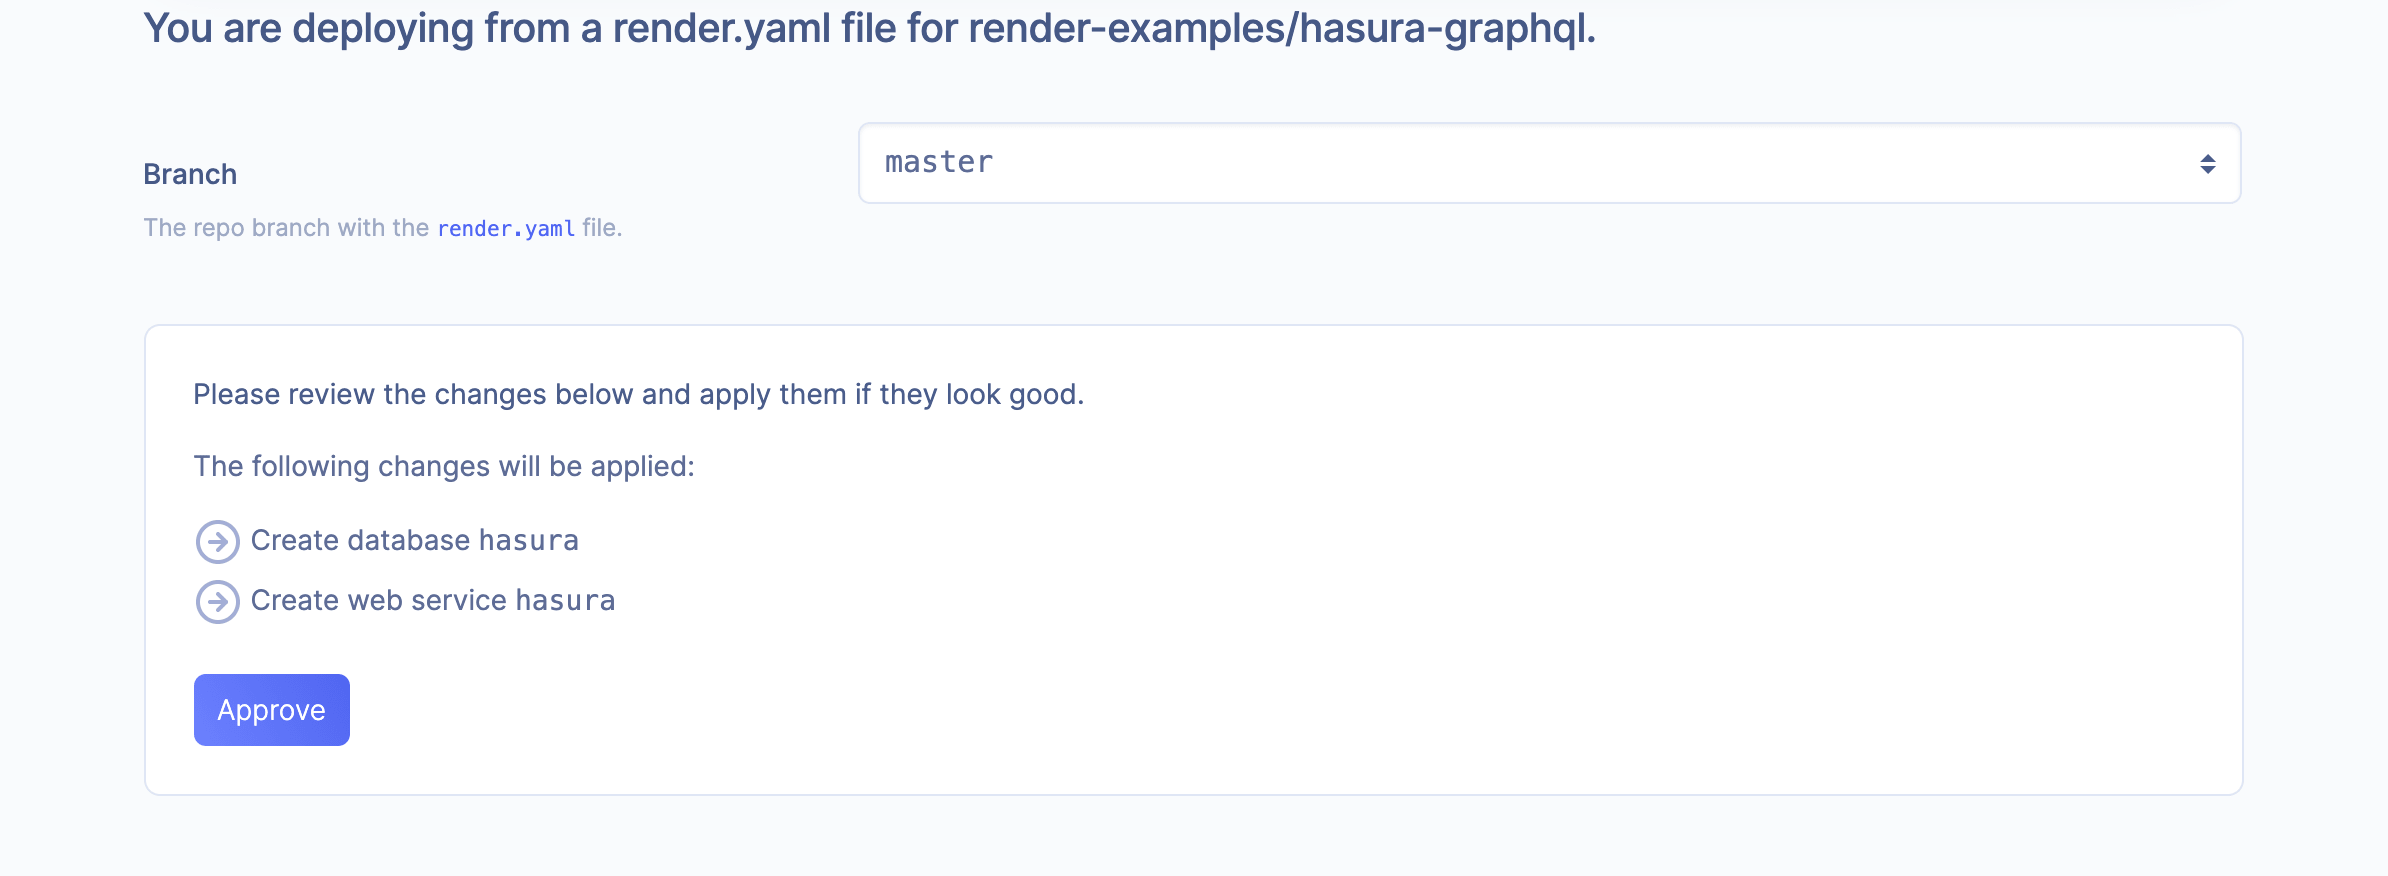 Deploy To Render Hasura Page